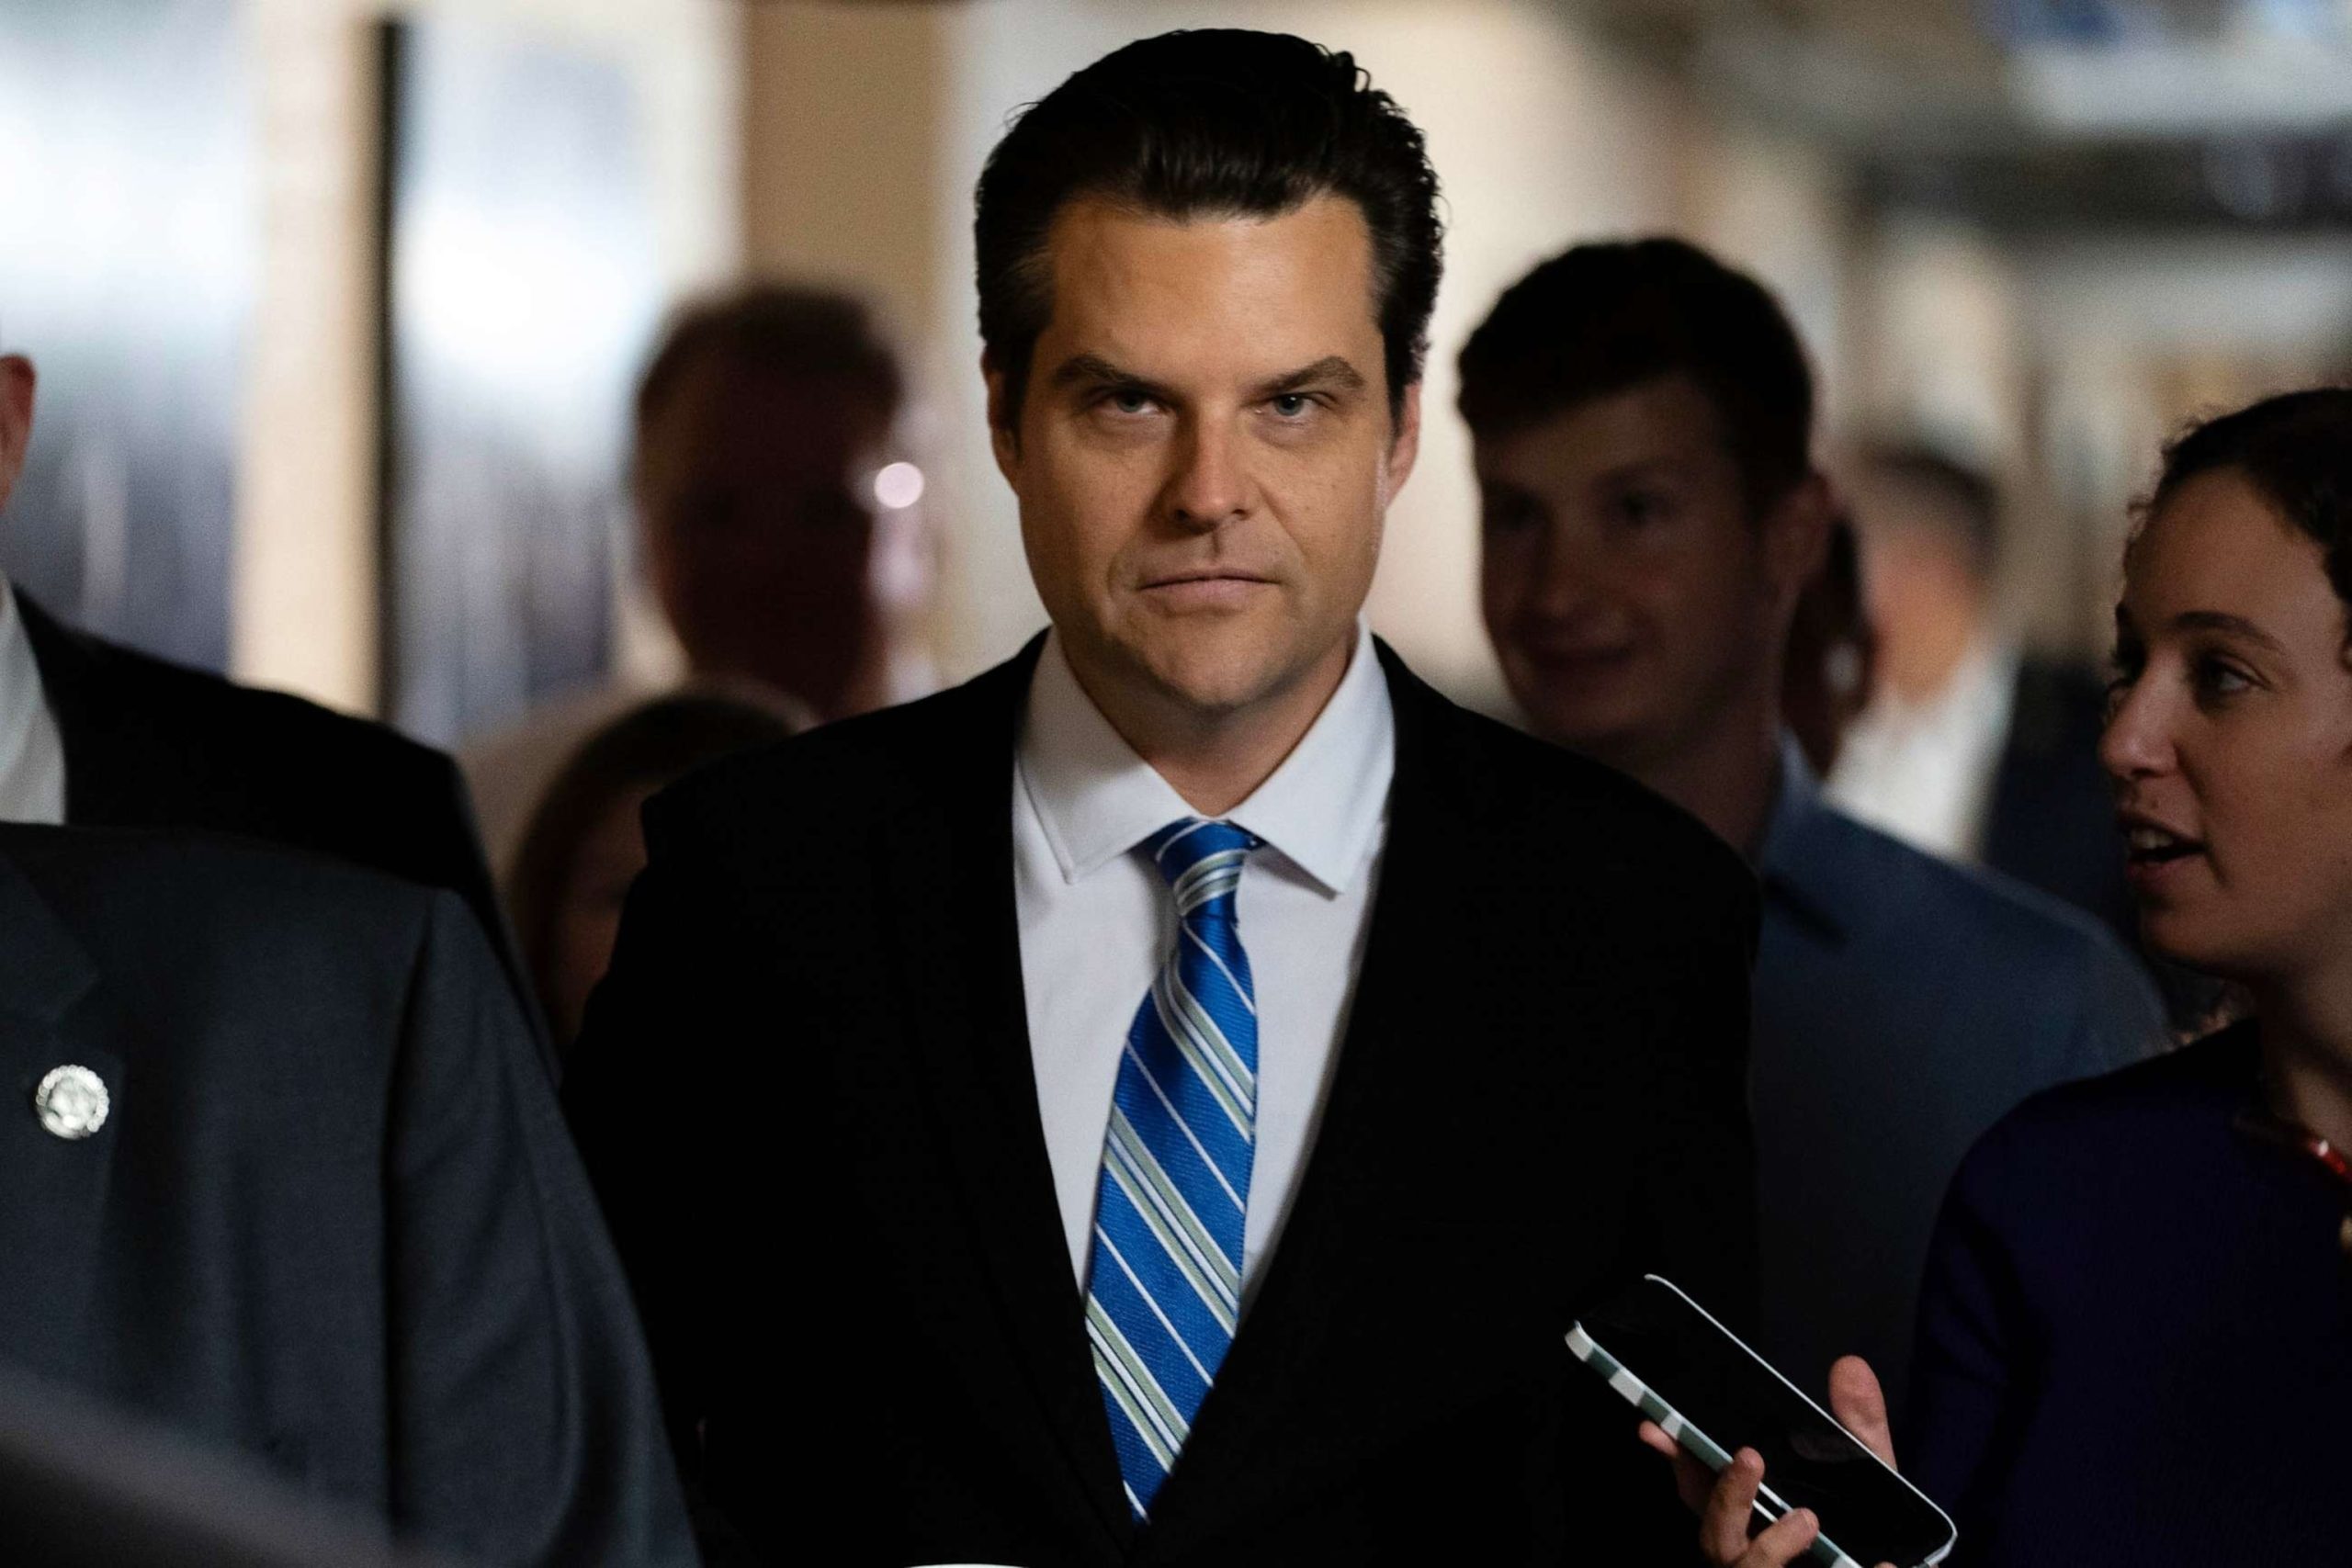 What to Expect After Gaetz's Threat to Remove Speaker Kevin McCarthy through Historic Vote